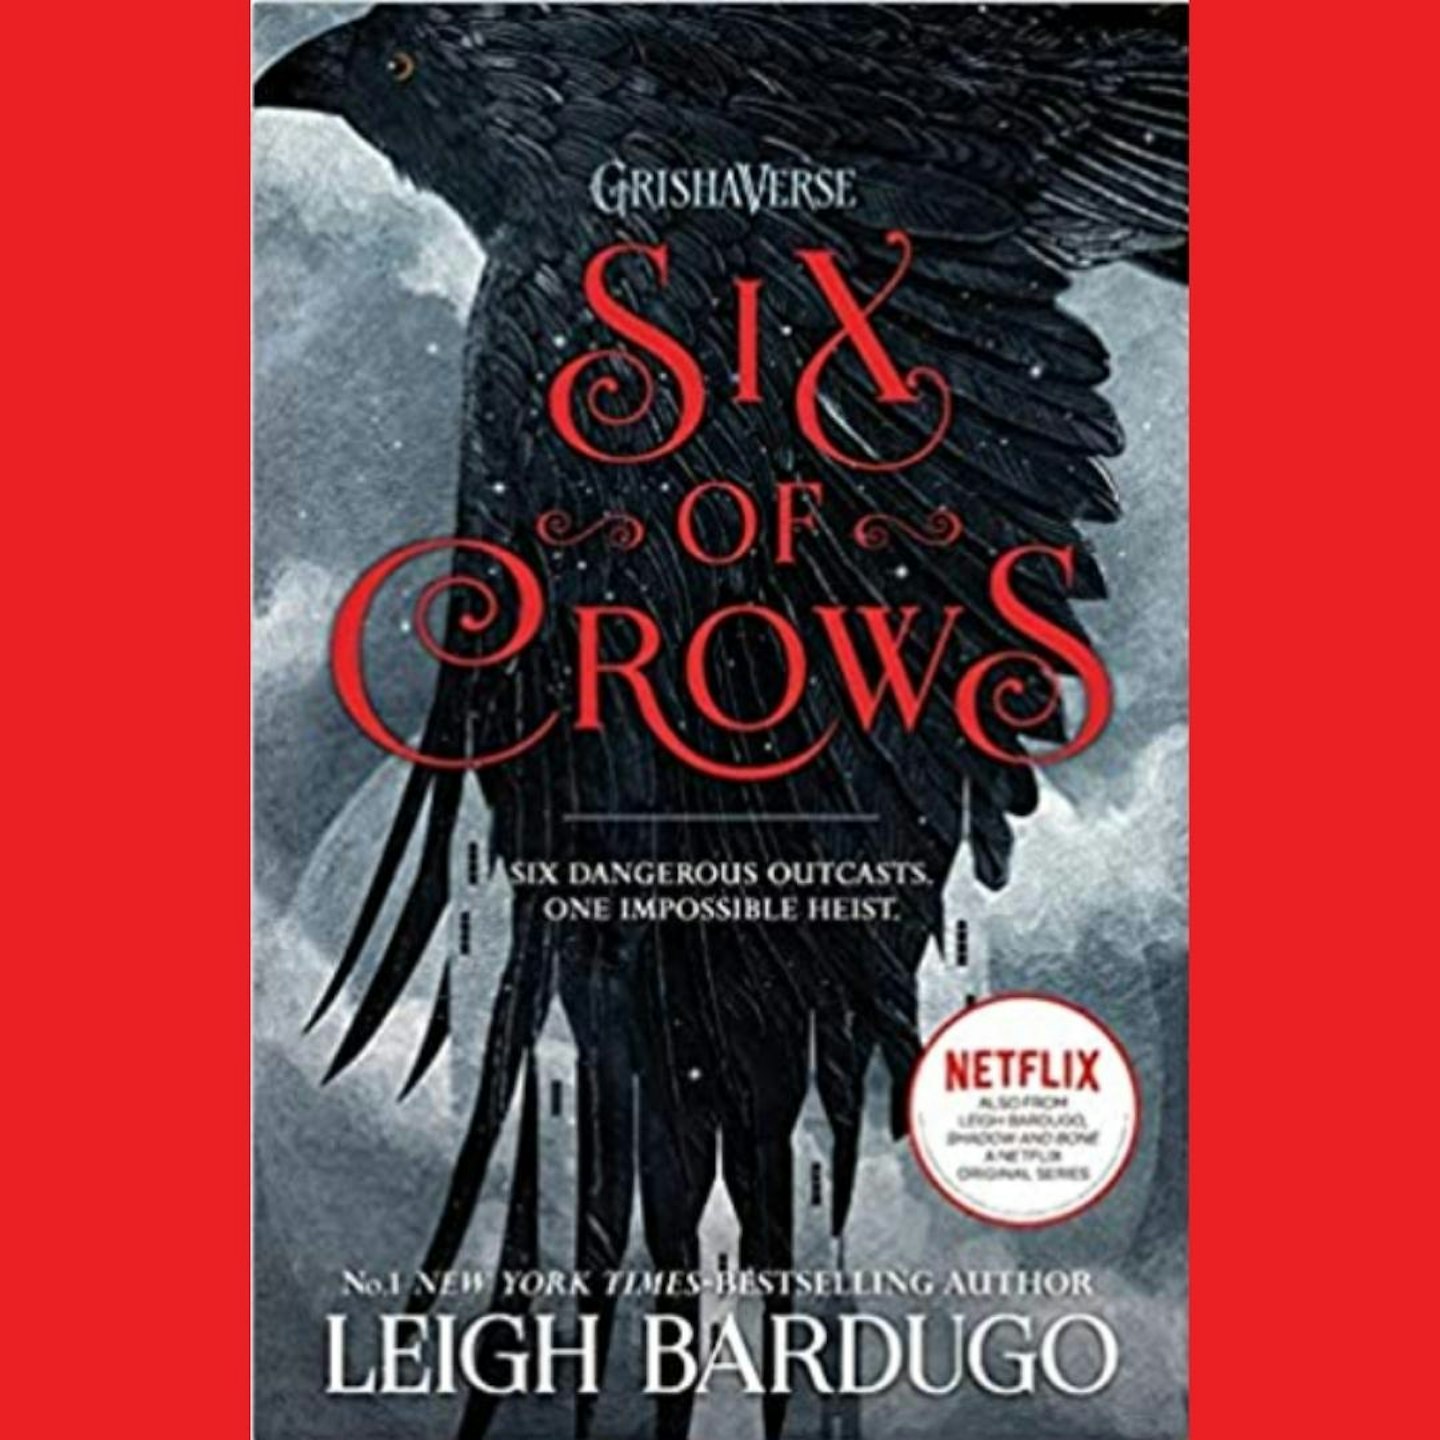 #BookTok Six of Crows by Leigh Bardugo